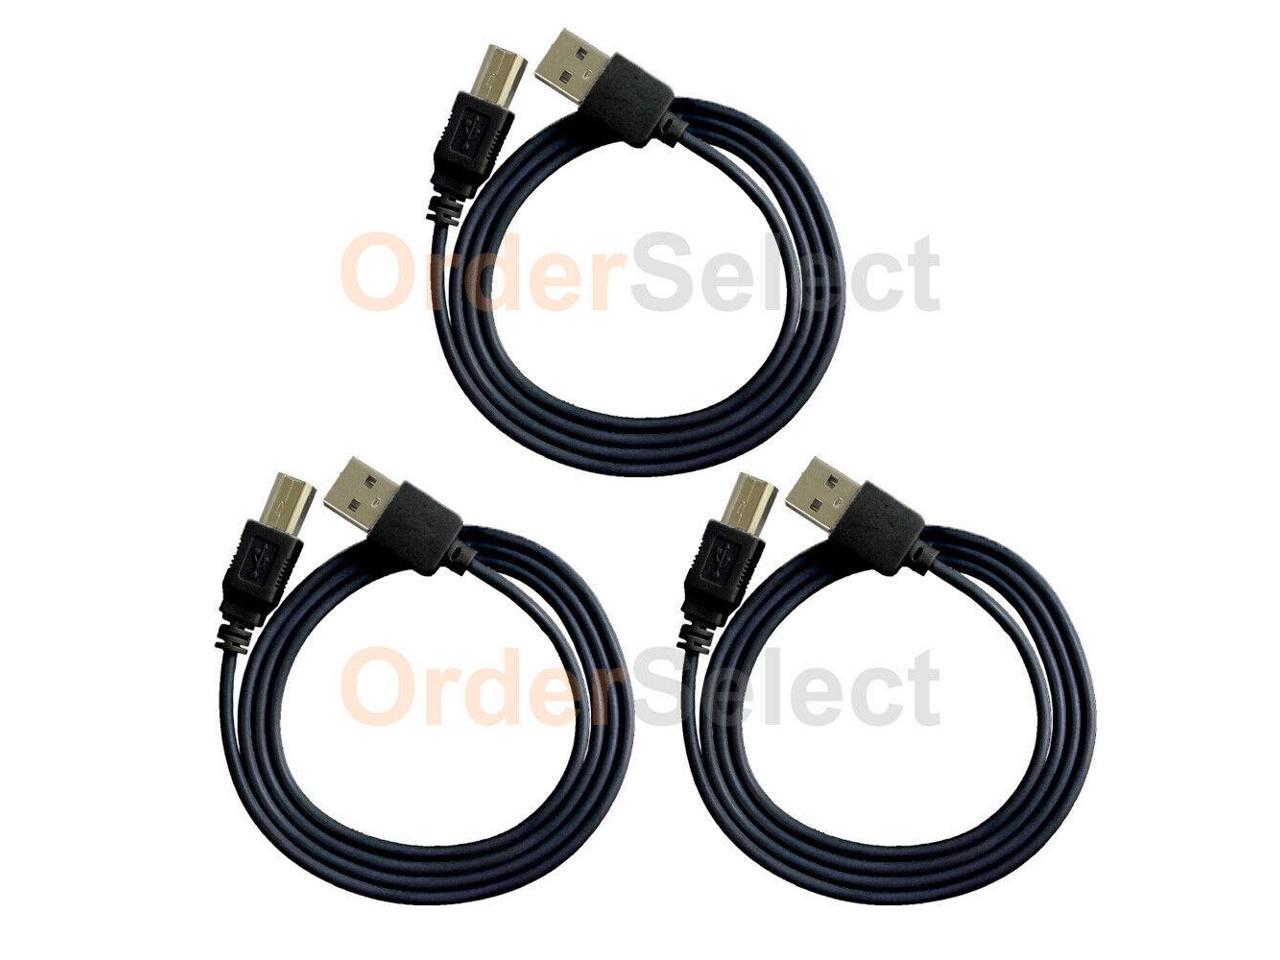 3 For HP PSC All-in-One Printer High Speed USB 2.0 Cable Cord 6FT NEW HOT! 